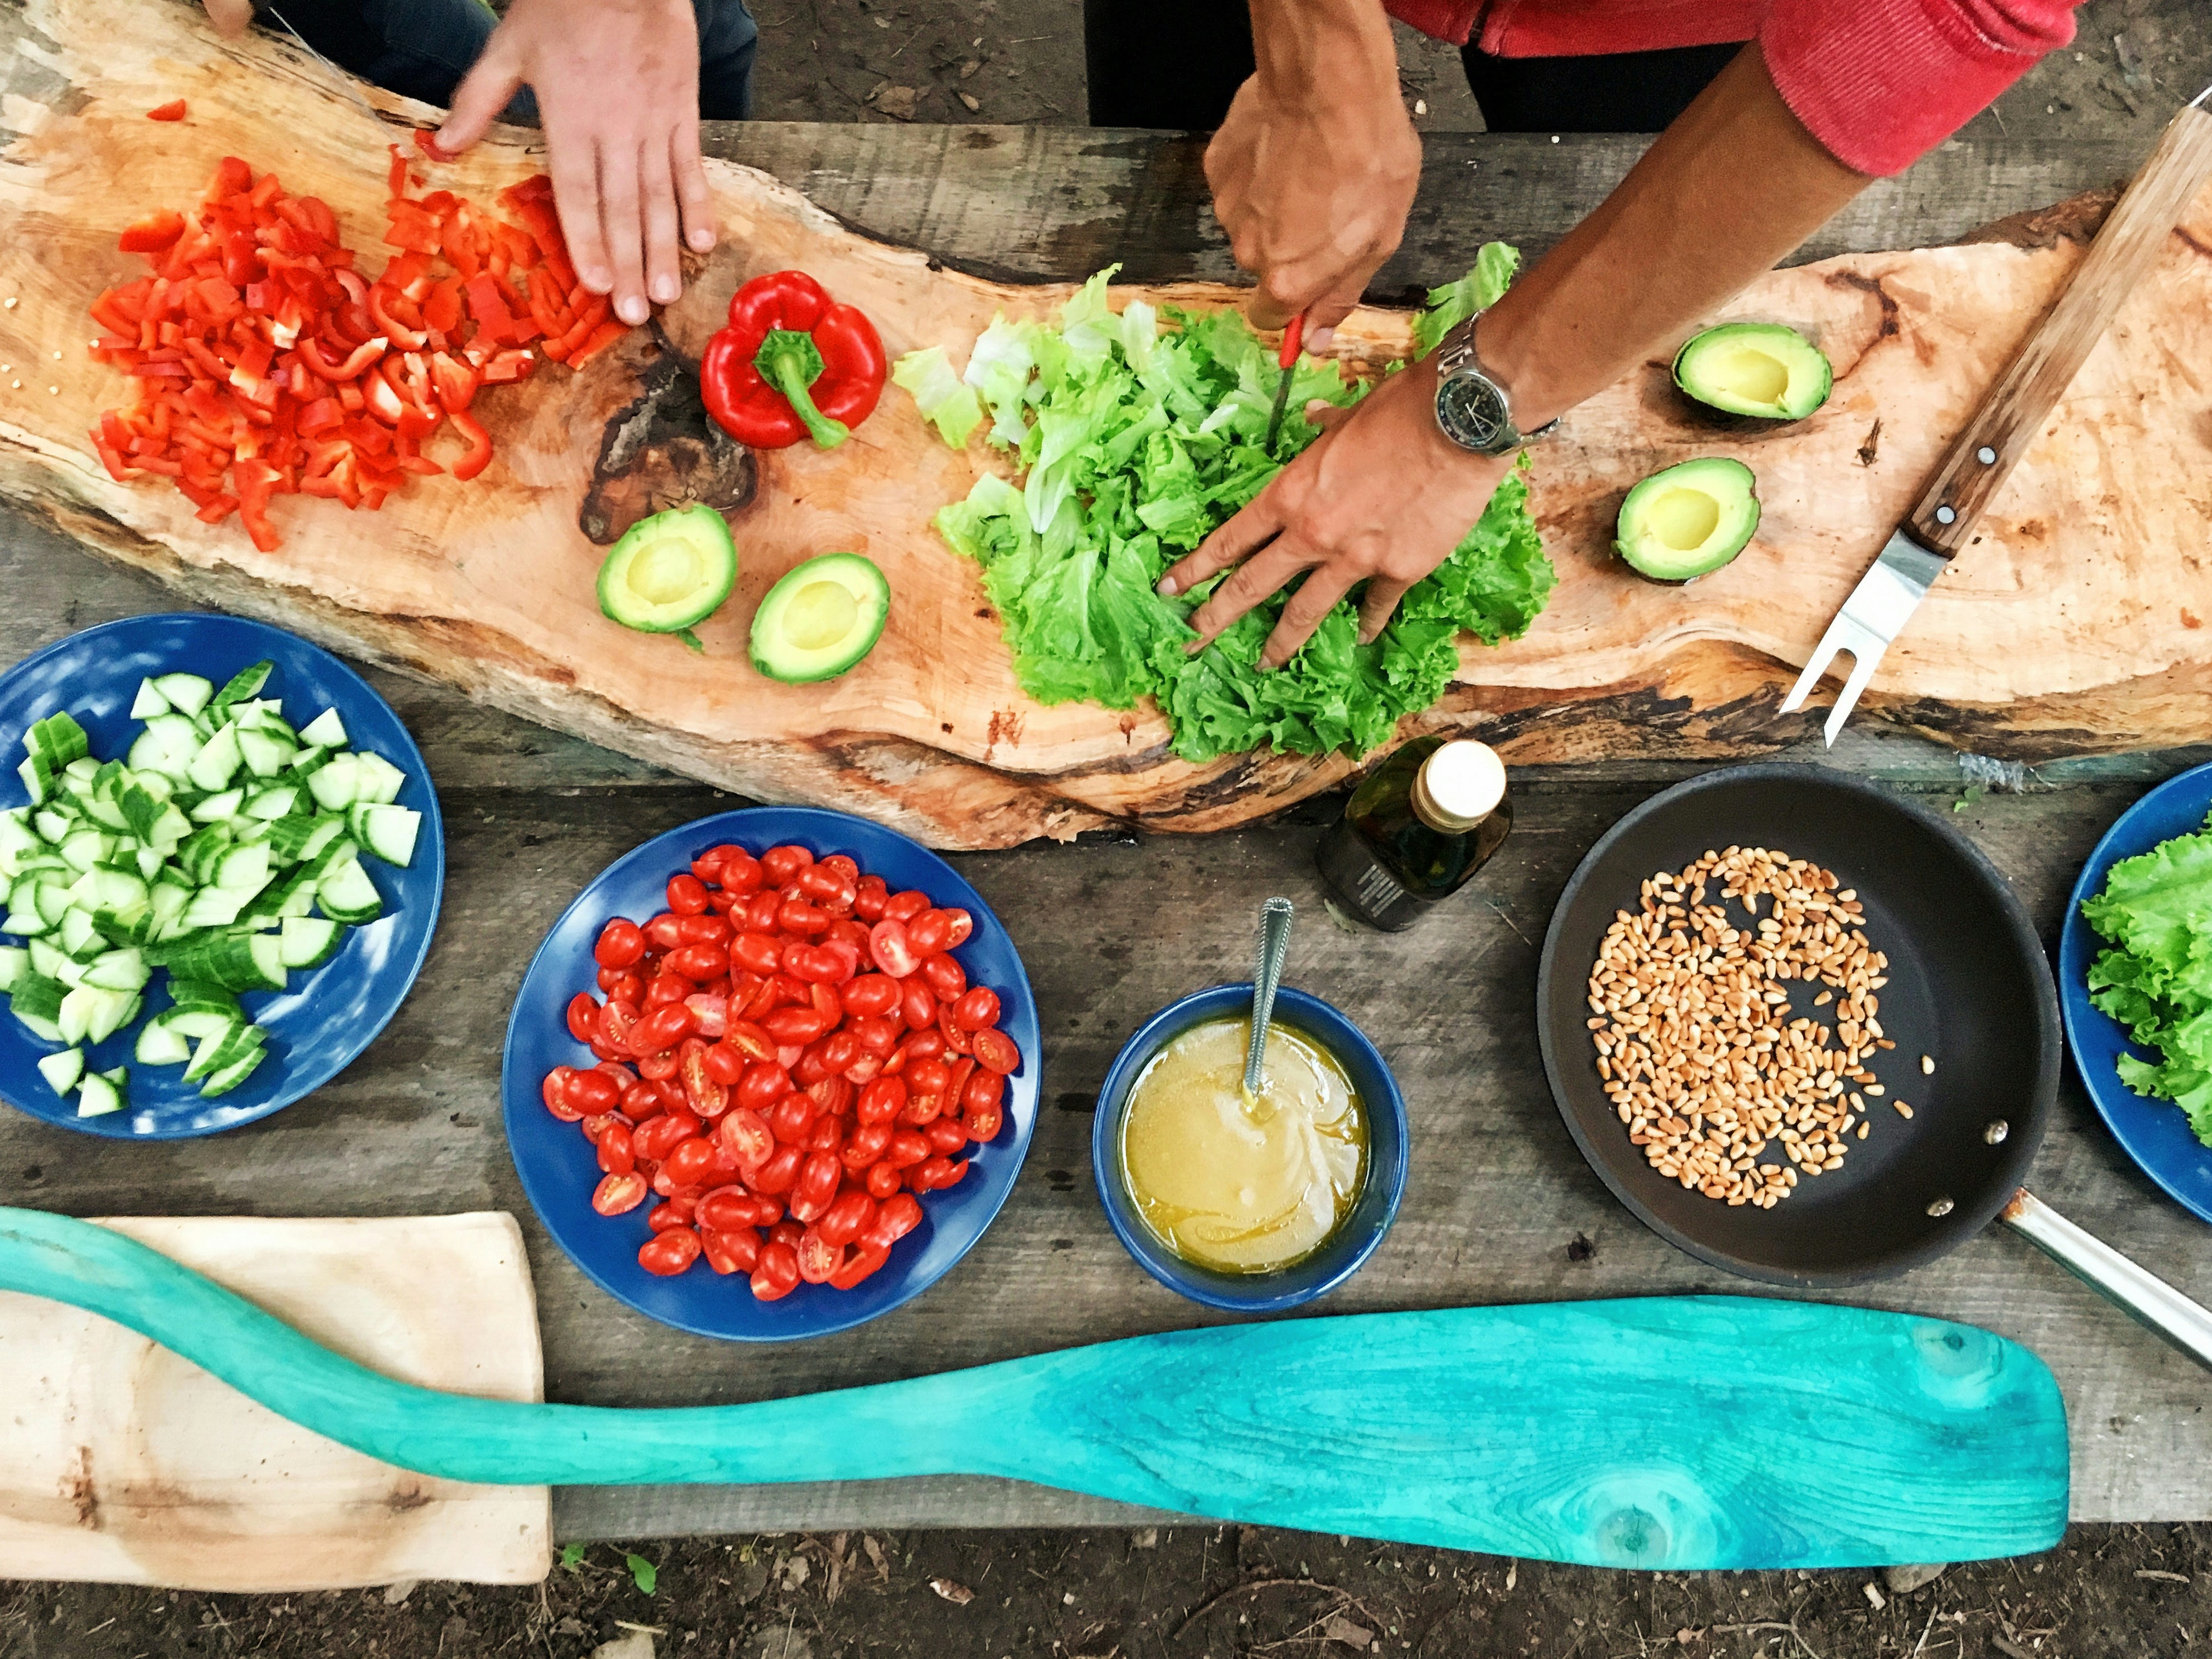 An overhead view of two people preparing salad